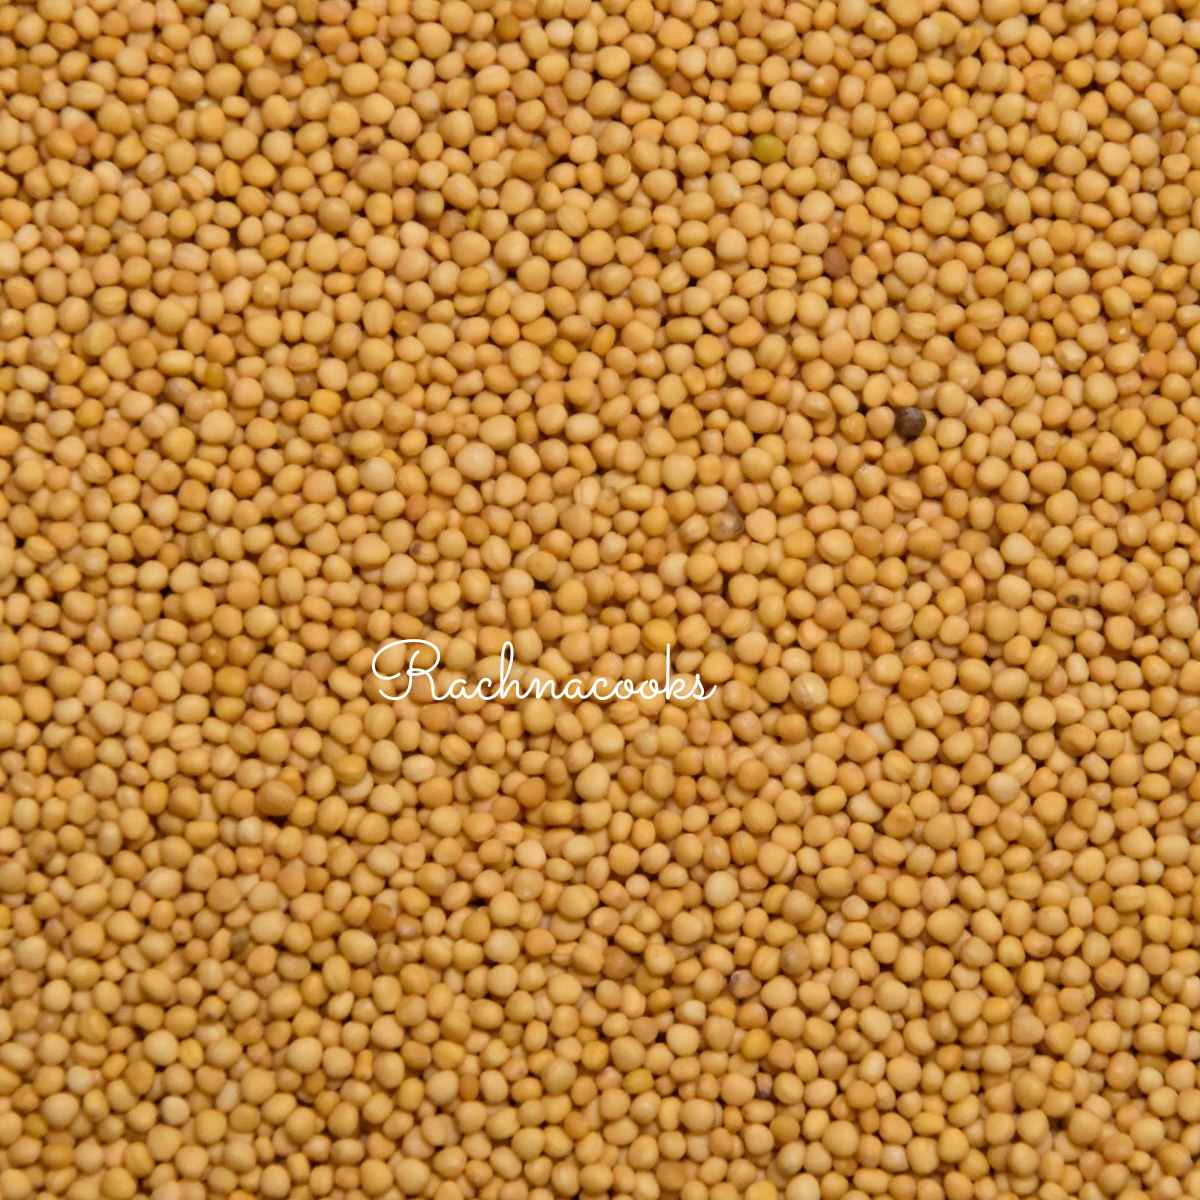 Yellow mustard seeds in a frame